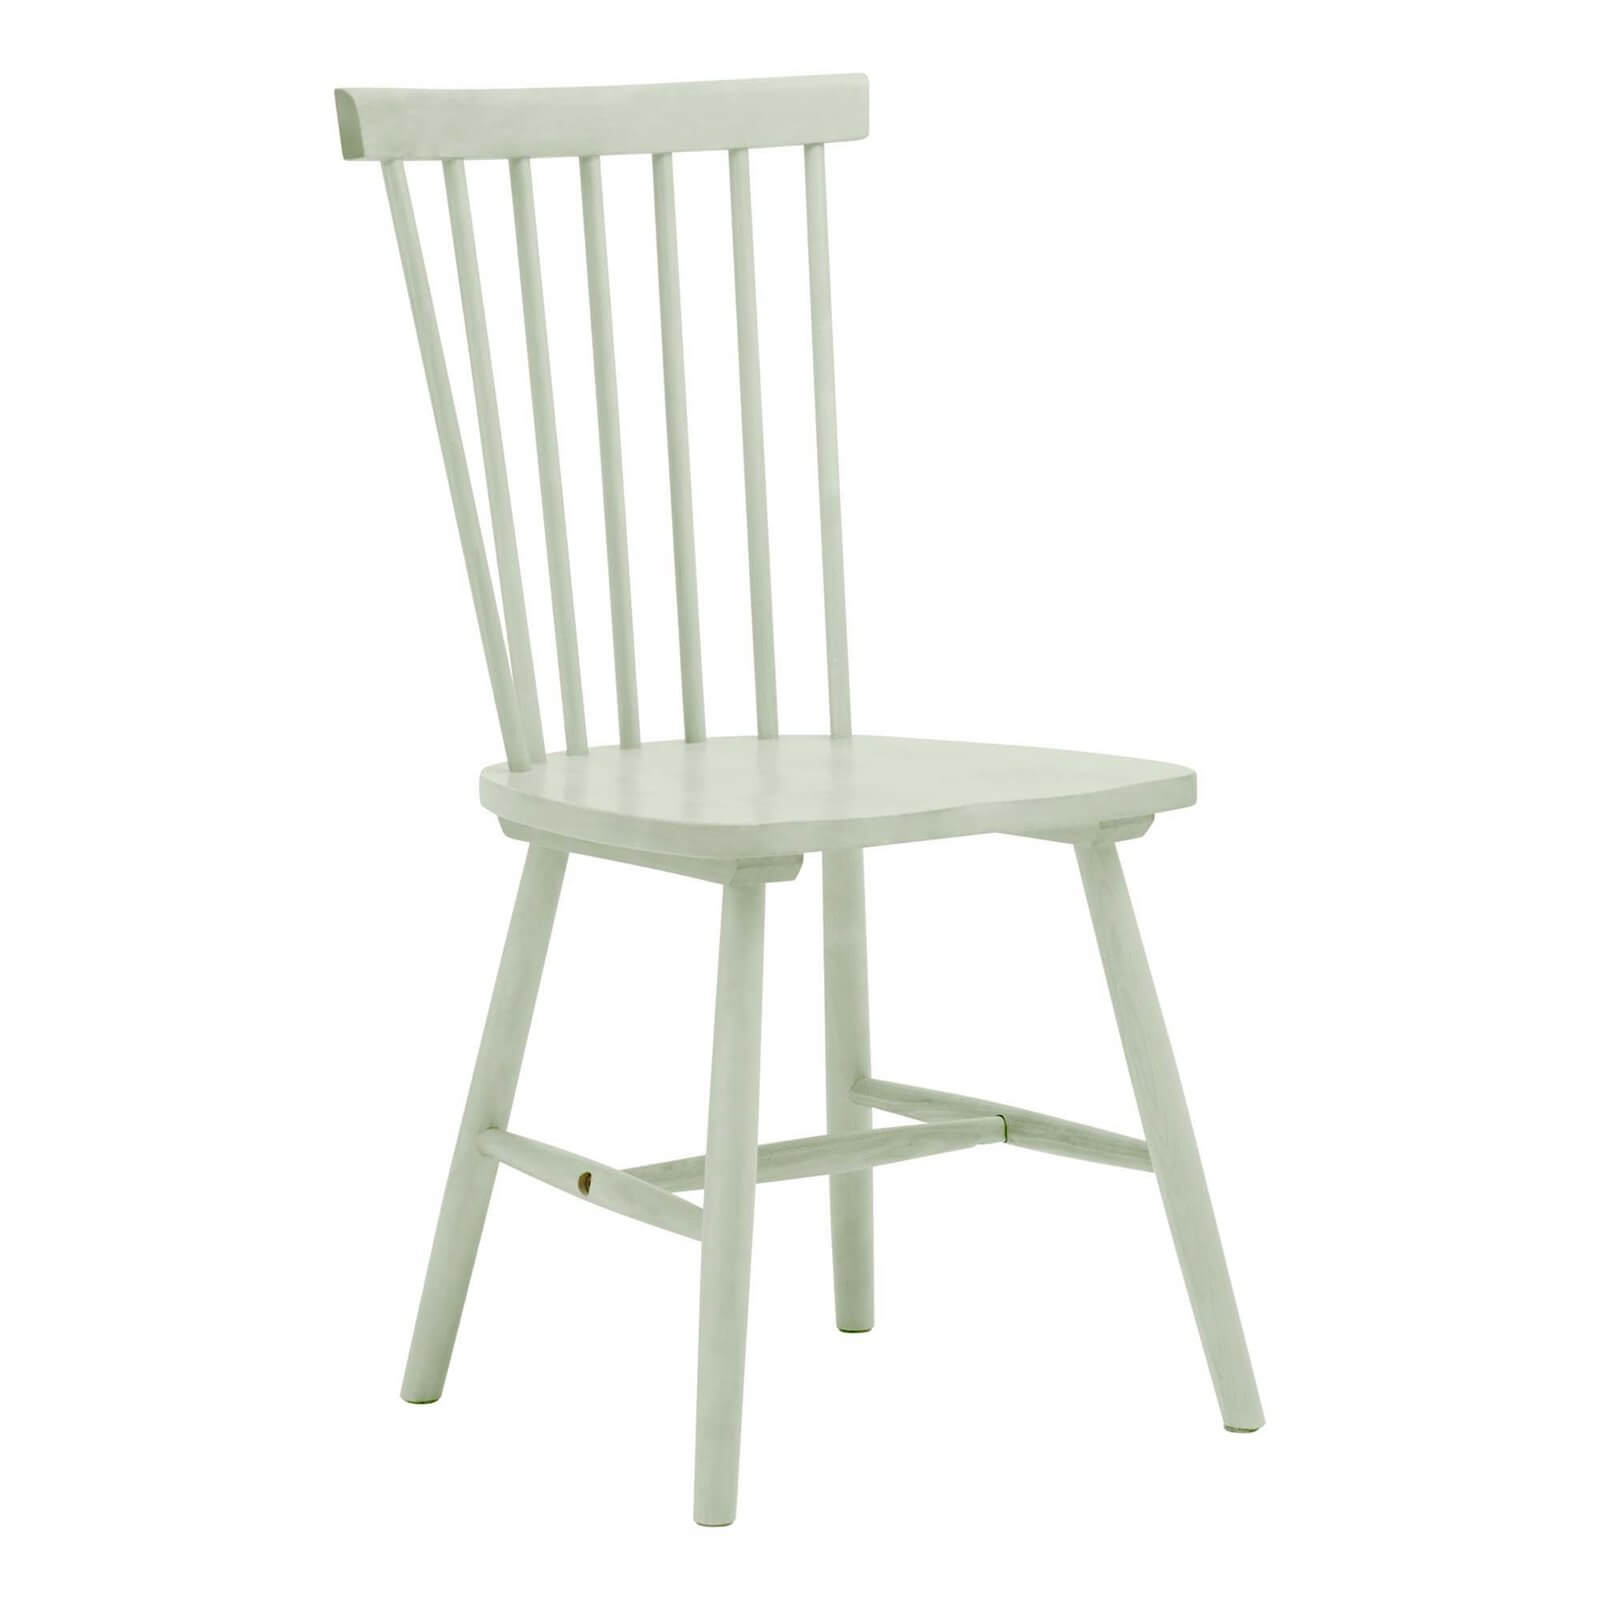 Laura 4 Seater Dining Set - Sage Green Spindle Chairs